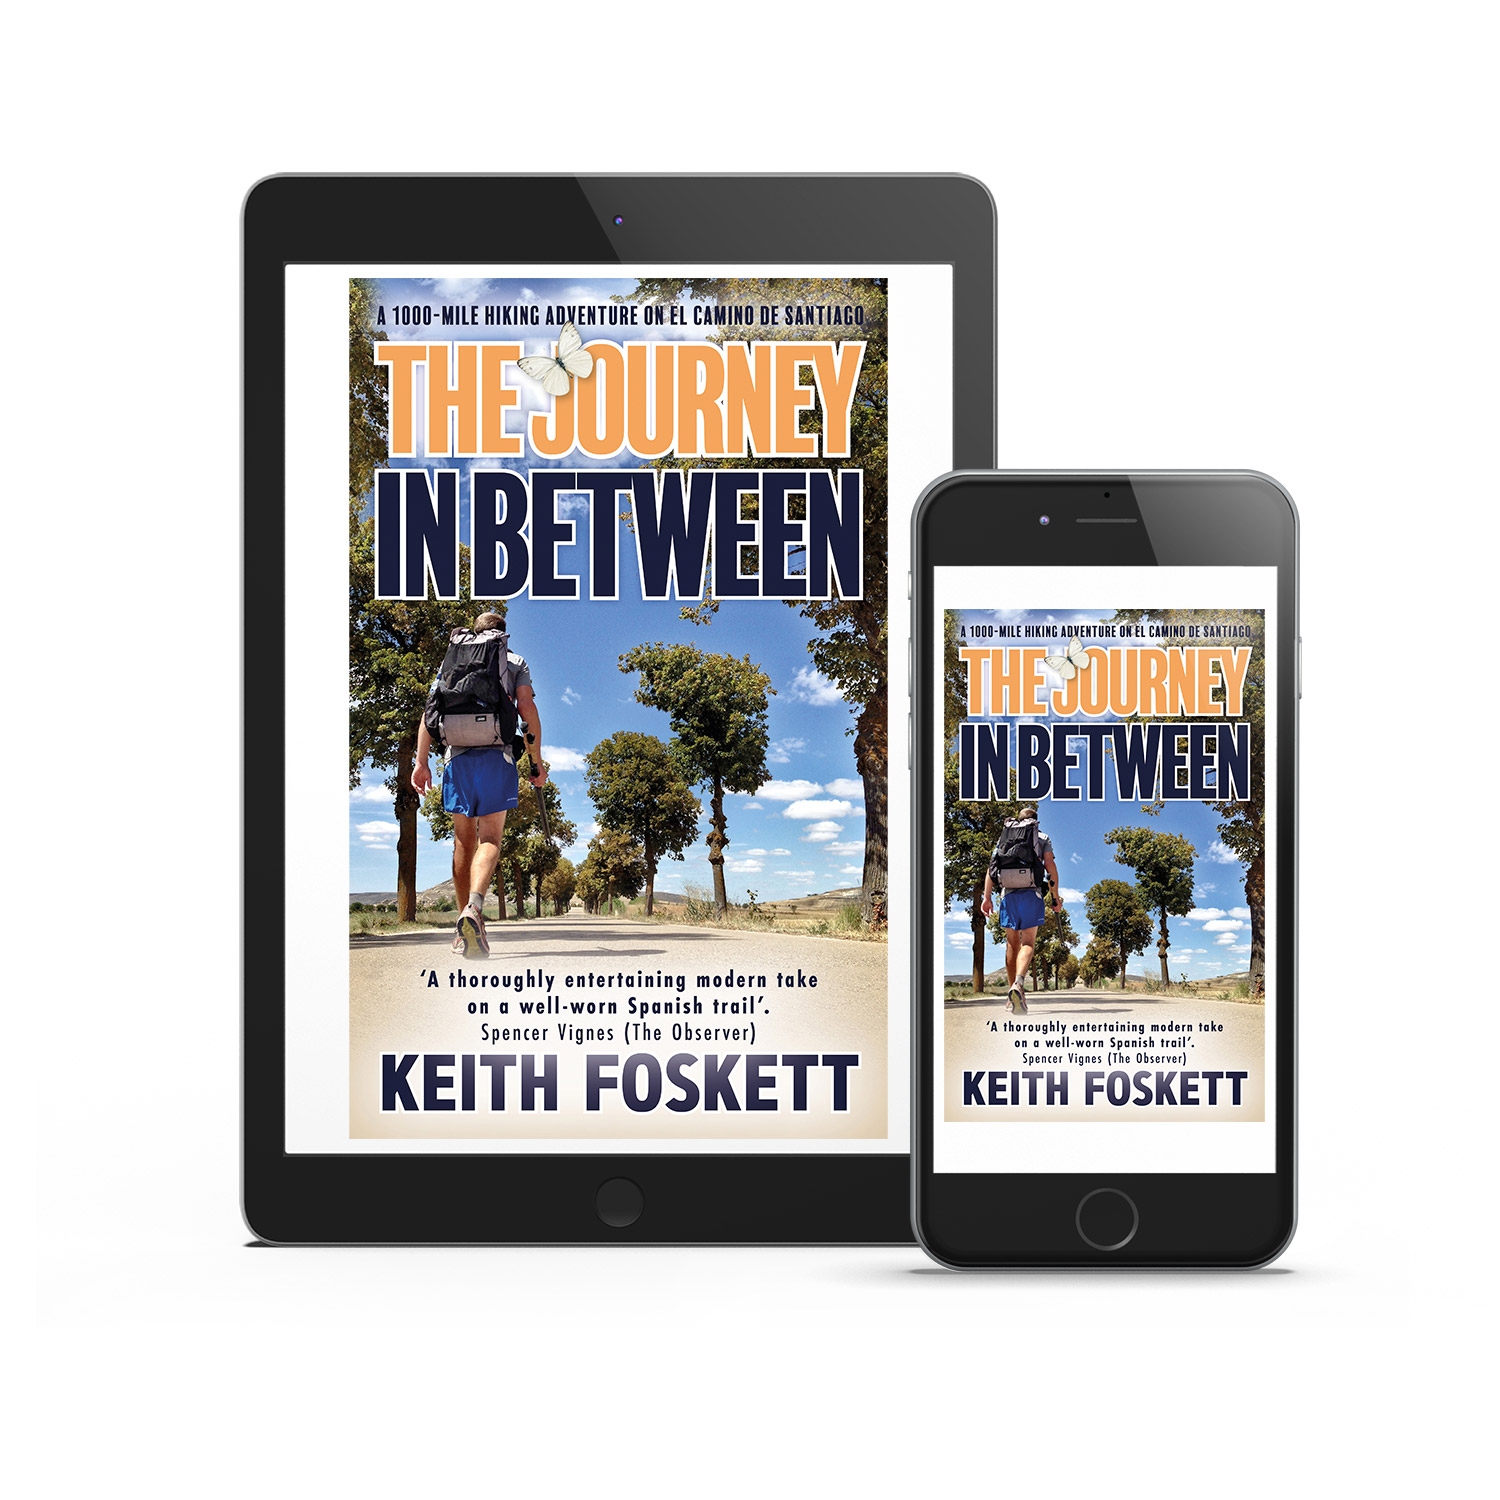 'The Journey In Between' is an excellent hiking memoir, about one man's trek along the El Camino De Santiago. The author is Keith Foskett. The book cover was designed by Mark Thomas, of coverness.com. To find out more about my book design services, please visit www.coverness.com.